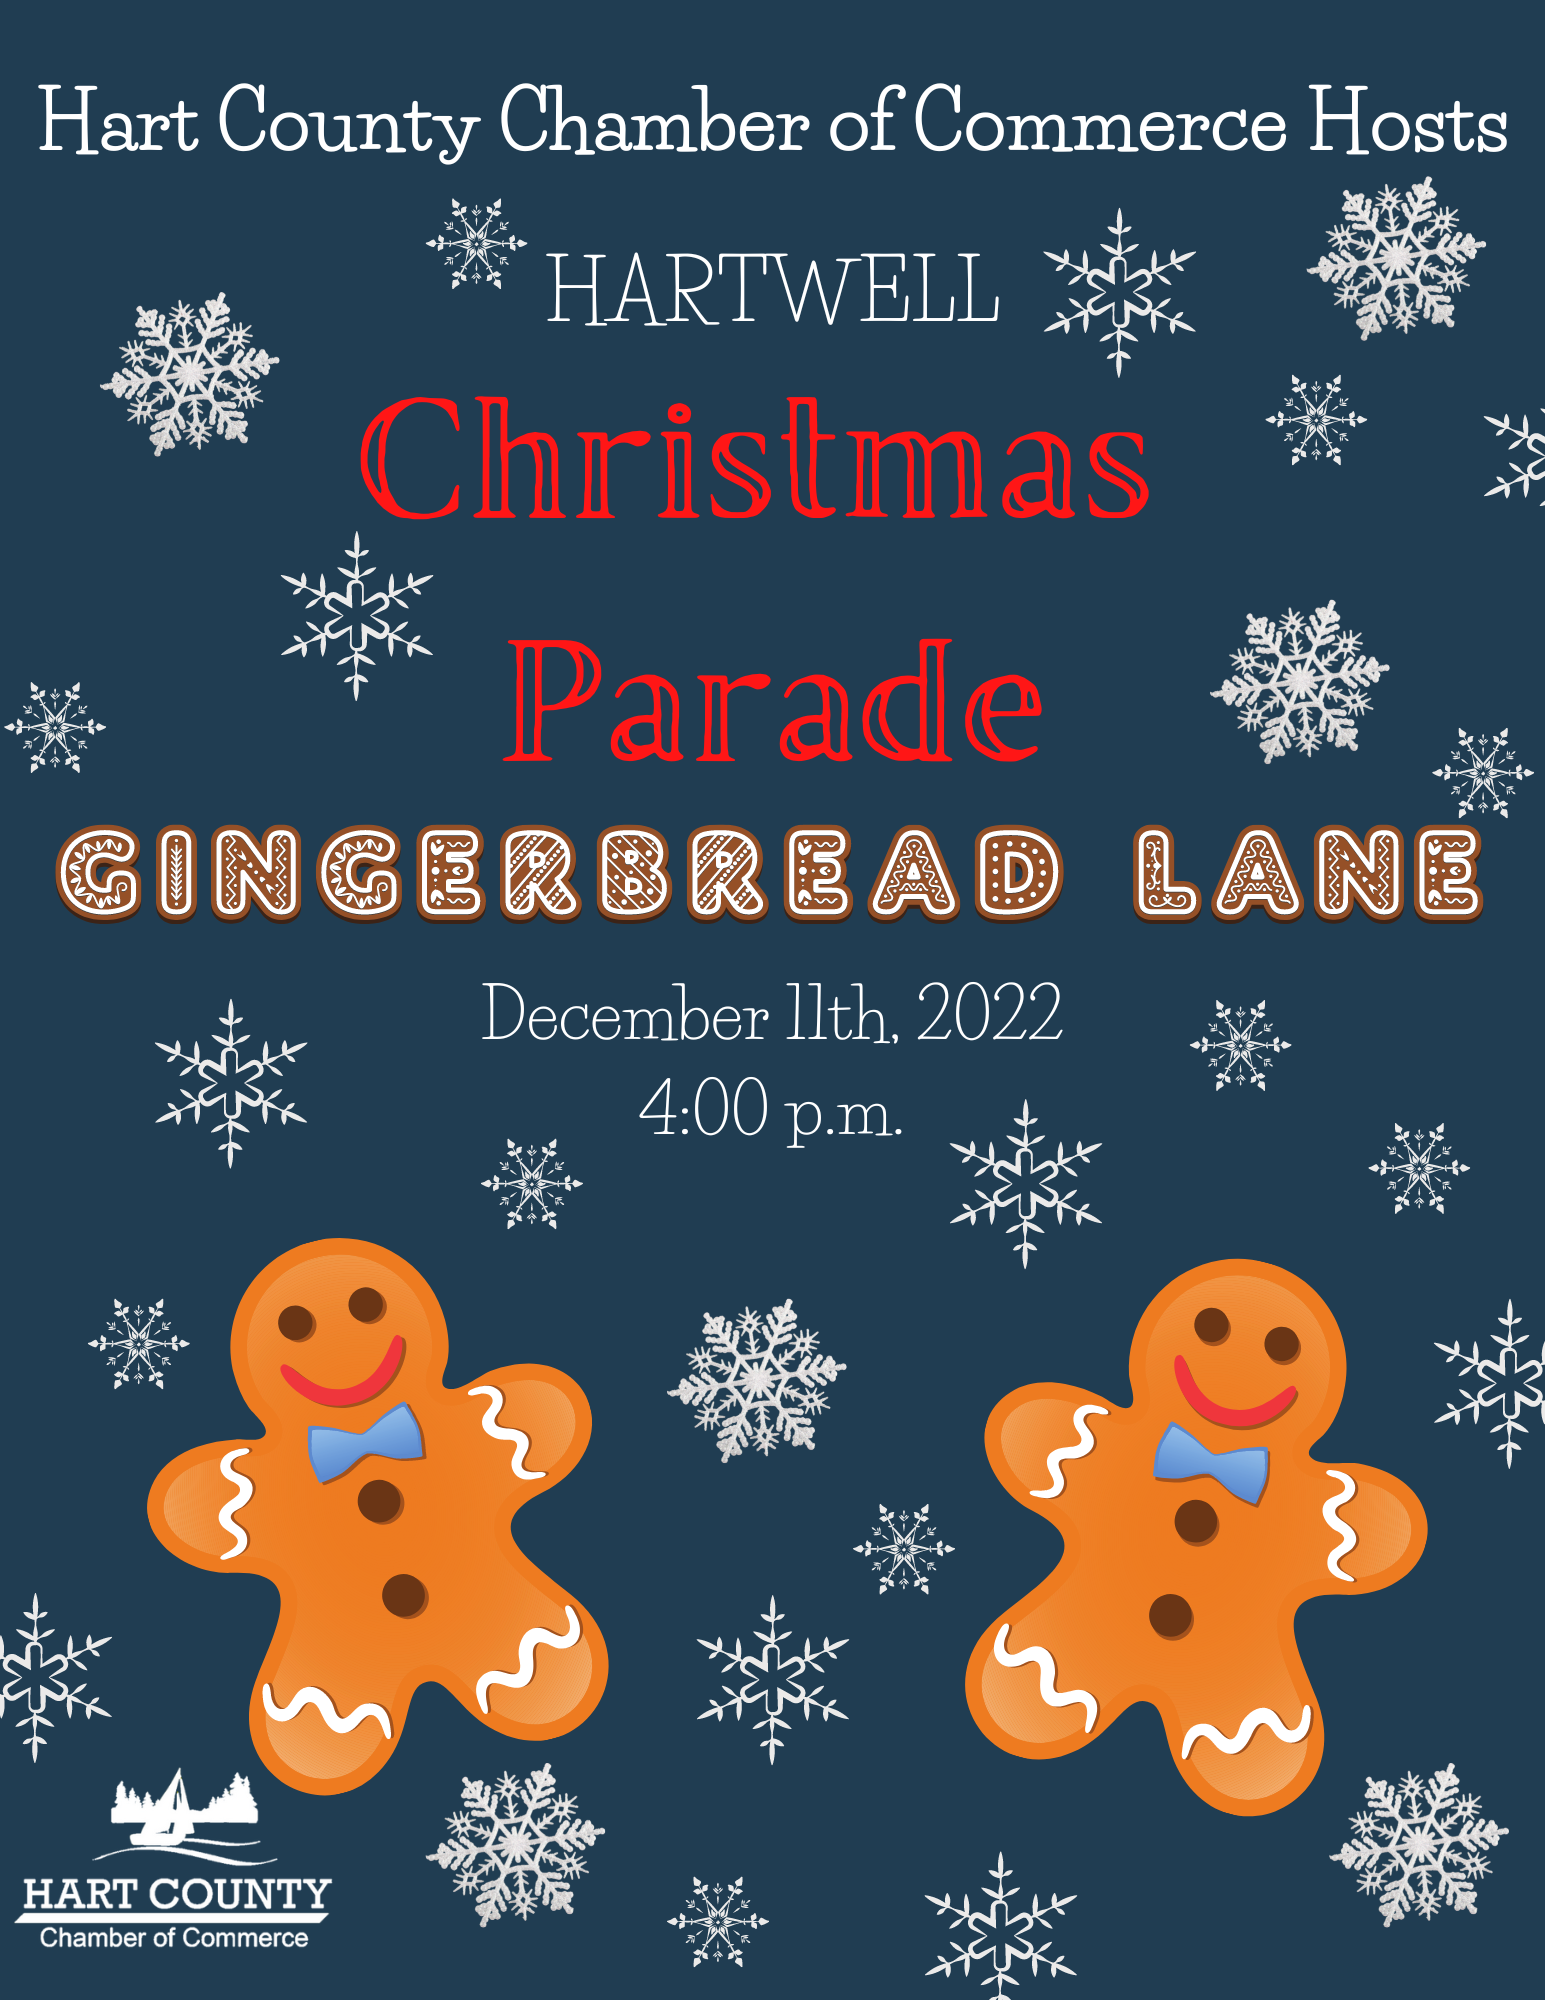 Two Christmas Parades Round Out Weekend 92.1 WLHR